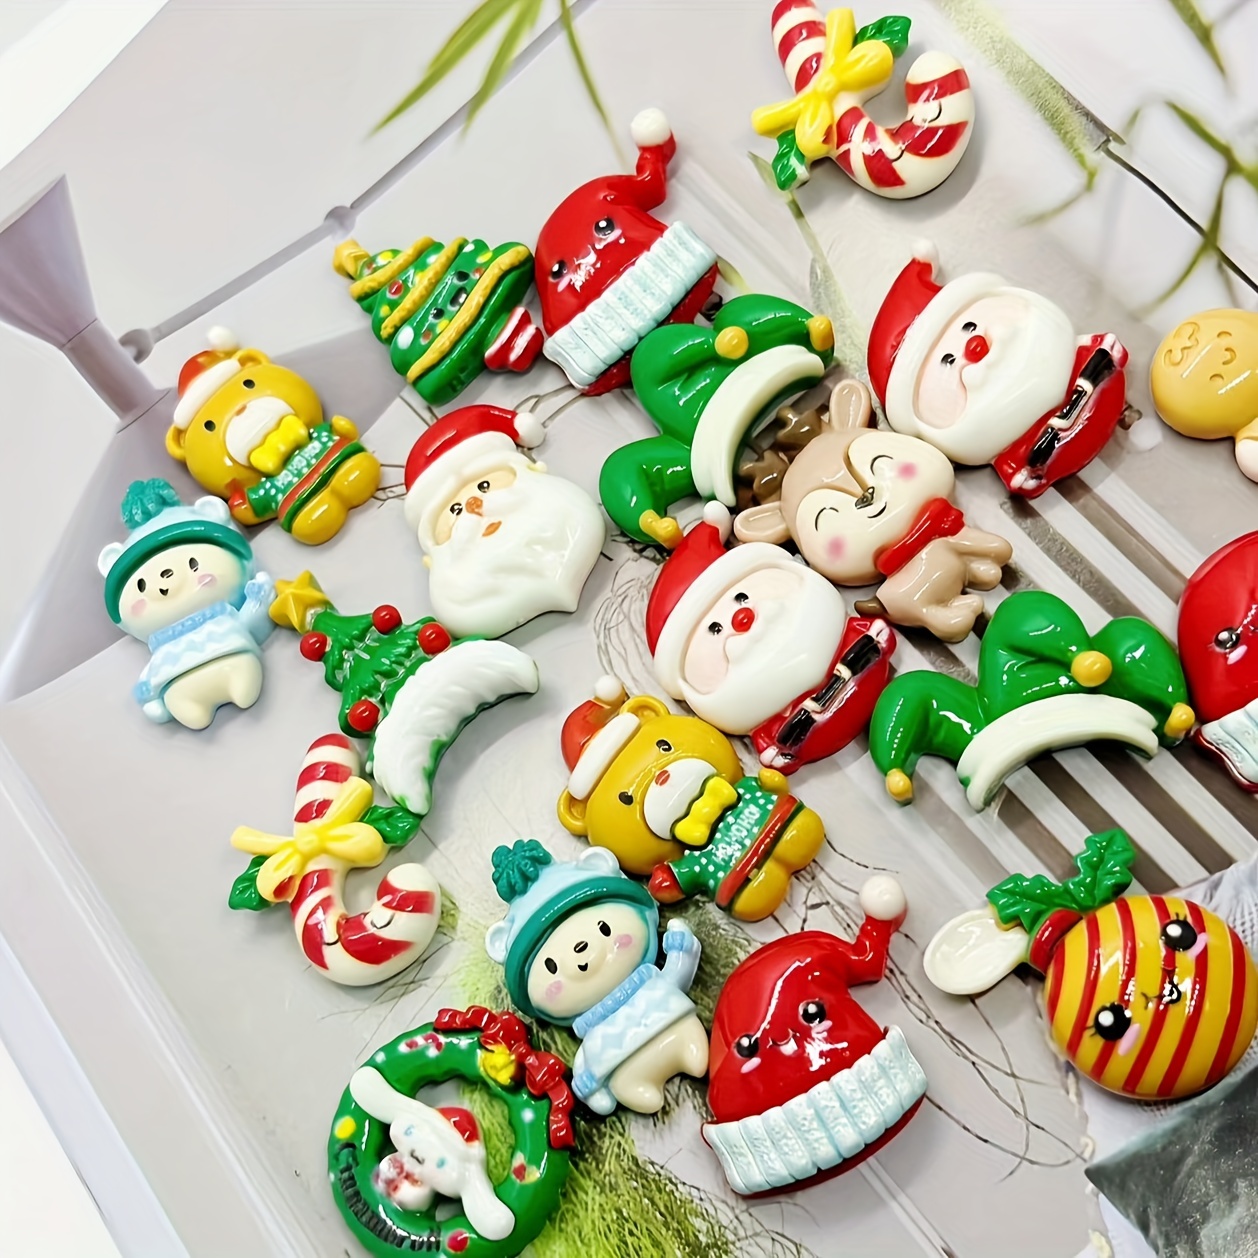 30/50pcs Christmas Resin Charms Beads Decorations Perfect For Crafts DIY  Jewelry Making Nails Phone Case Decorations Assorted Varieties